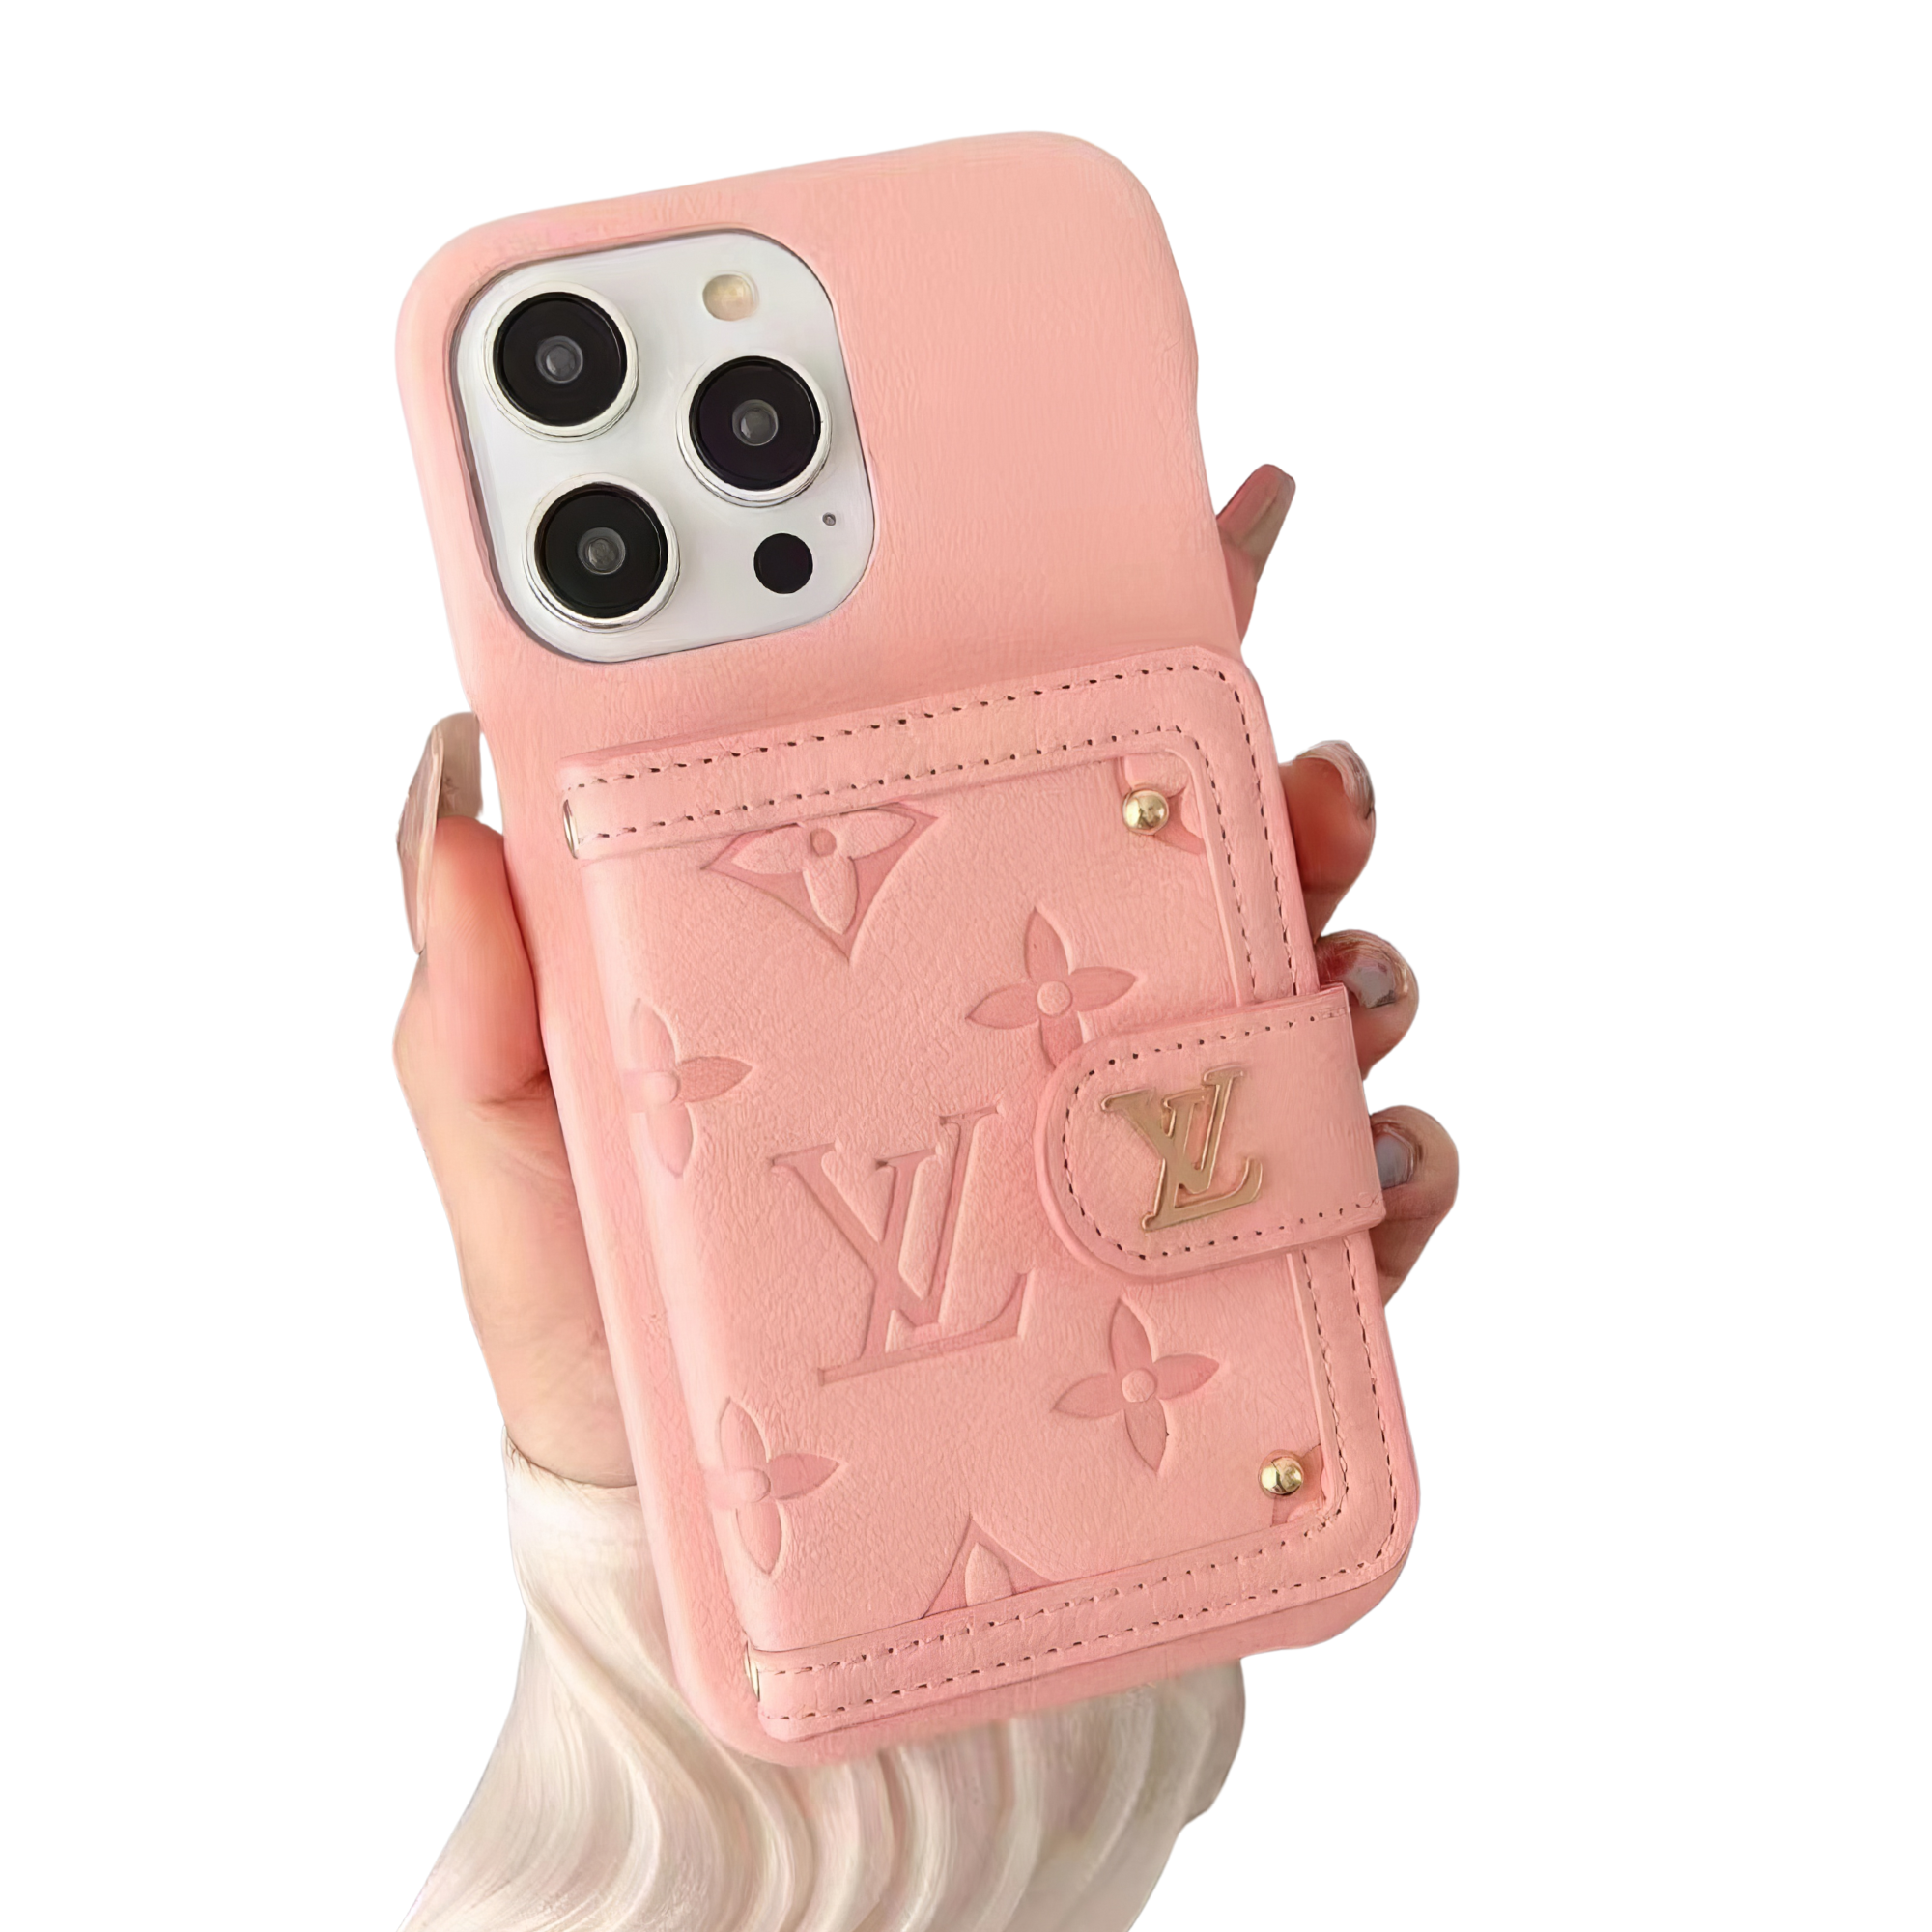 Pink Louis Vuitton leather iPhone case with card holder and monogram pattern.